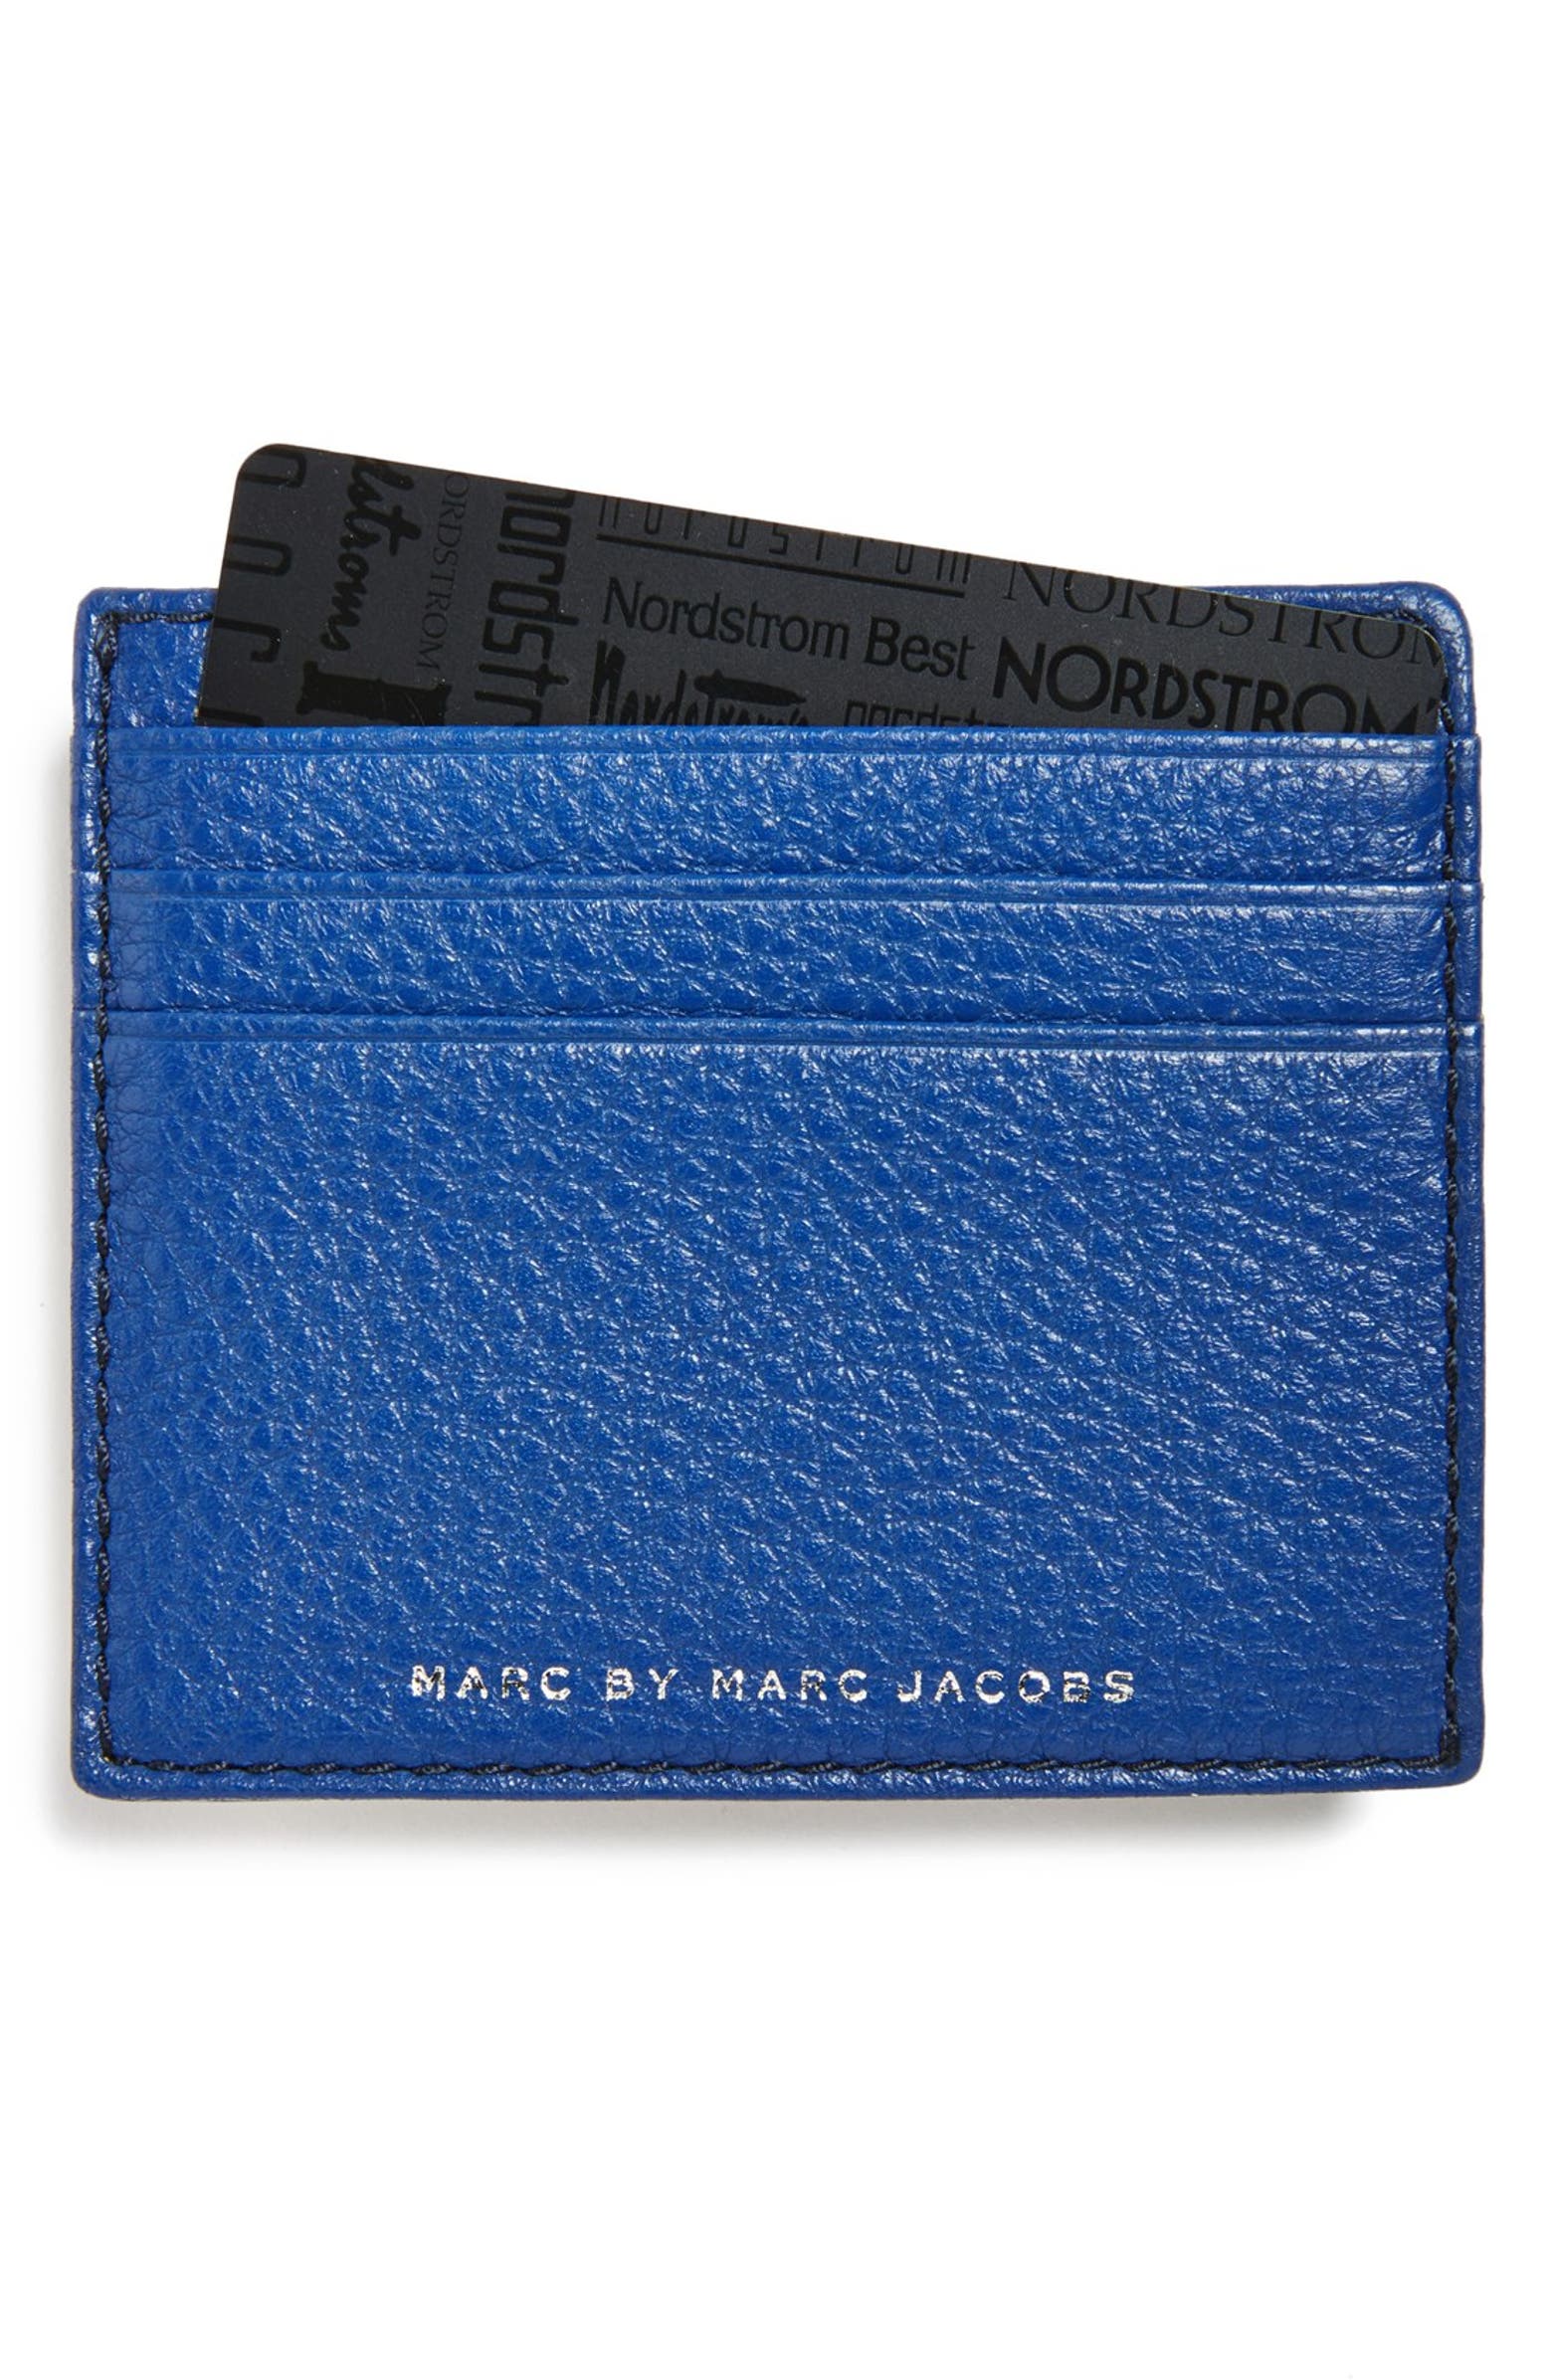 MARC BY MARC JACOBS 'Classic' Leather Card Case | Nordstrom